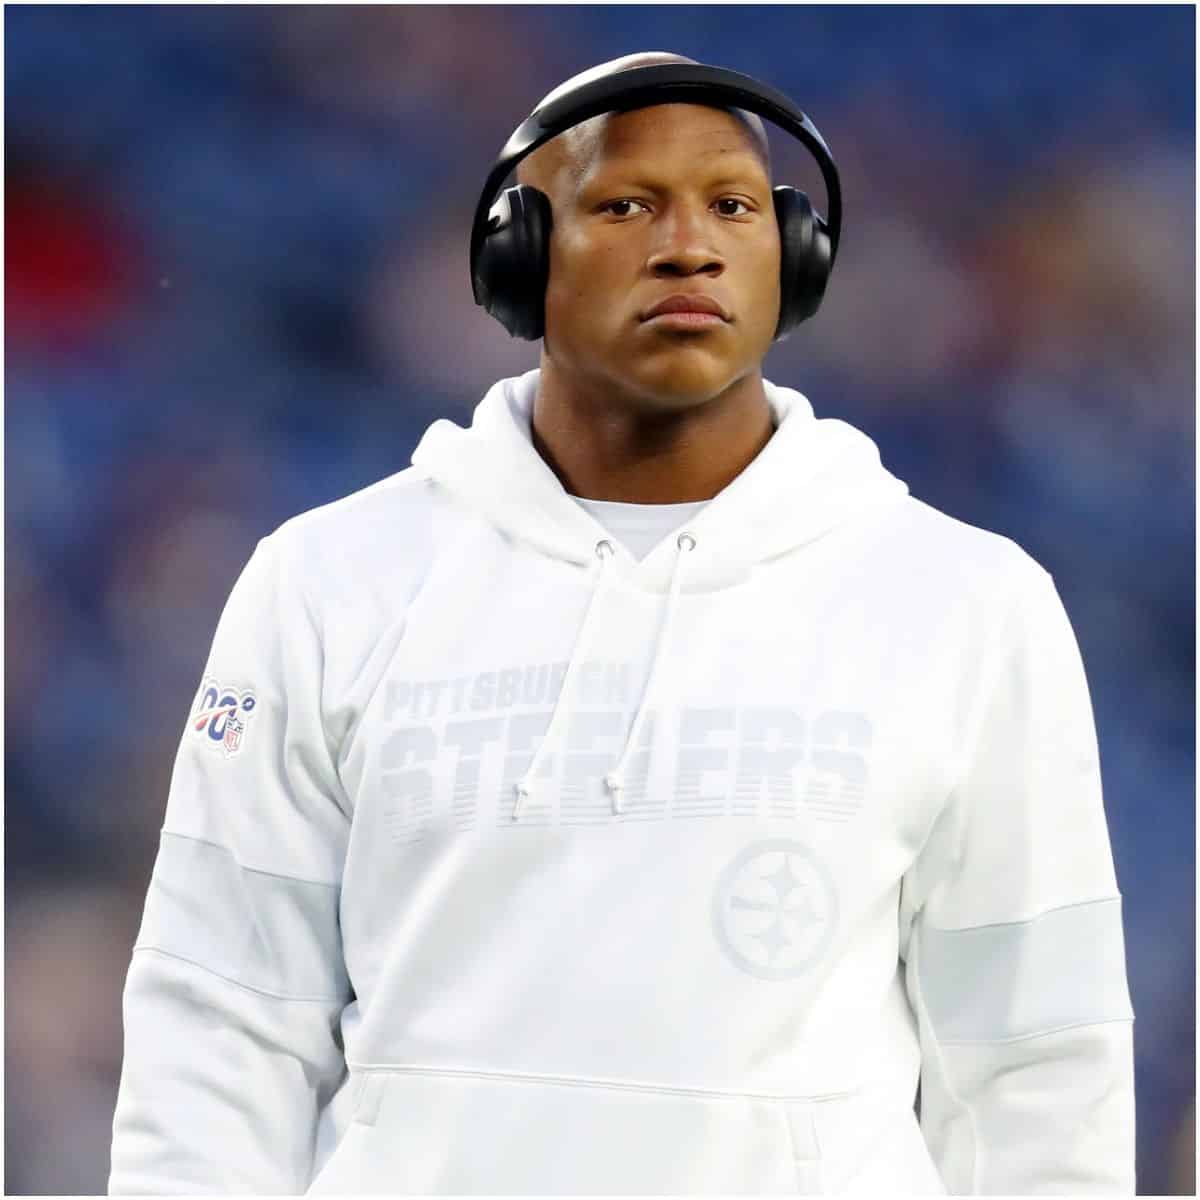 what is the net worth of Ryan Shazier